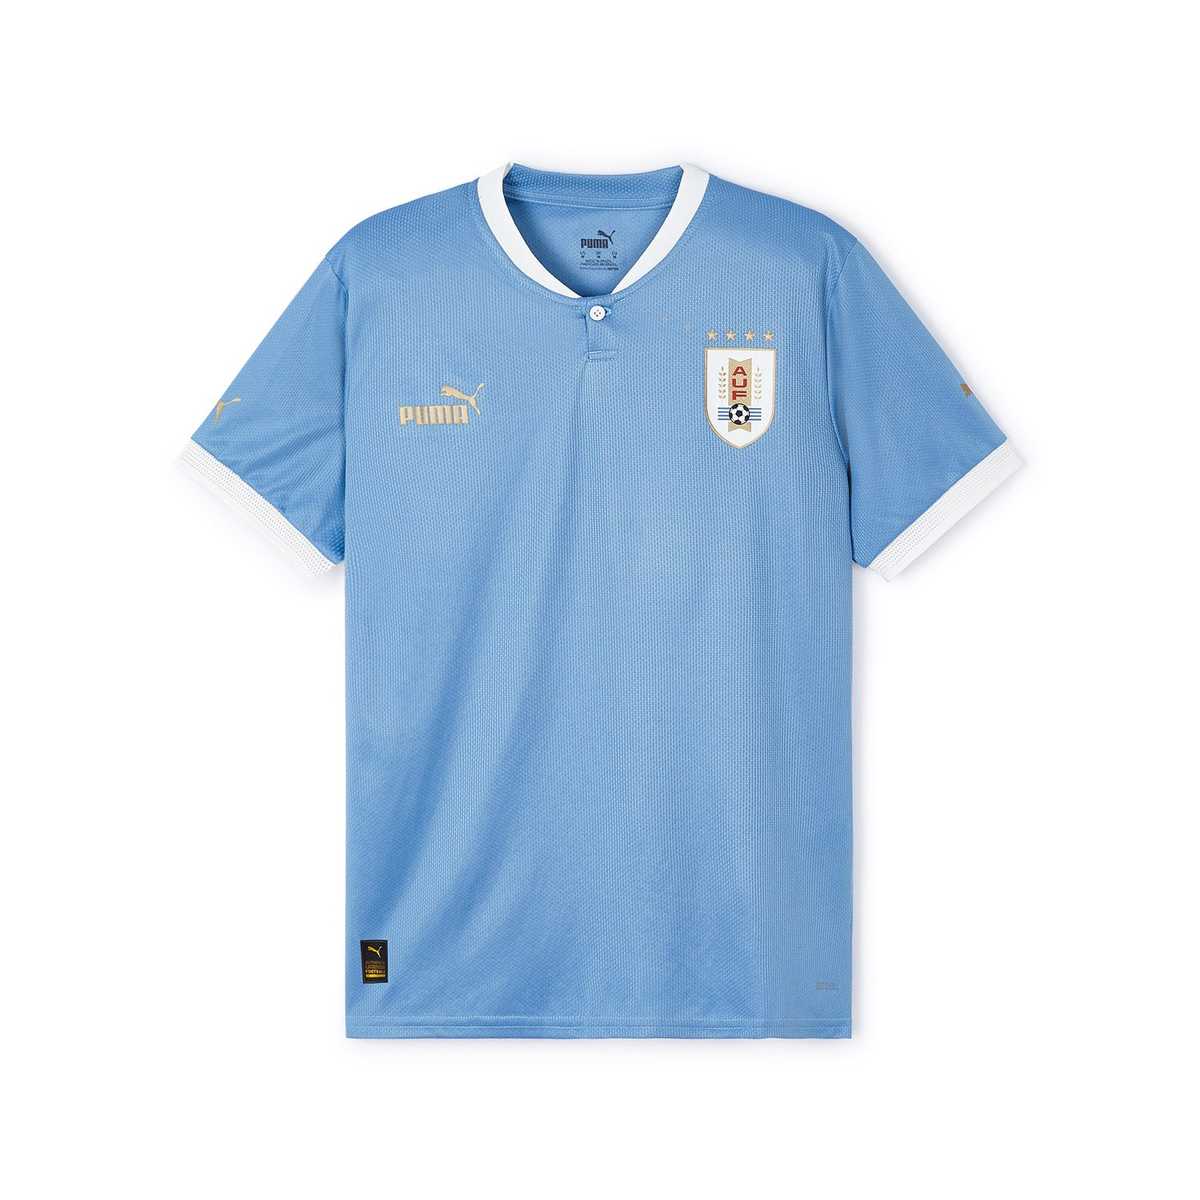 Uruguay Home Jersey - Men's - Official FIFA Store